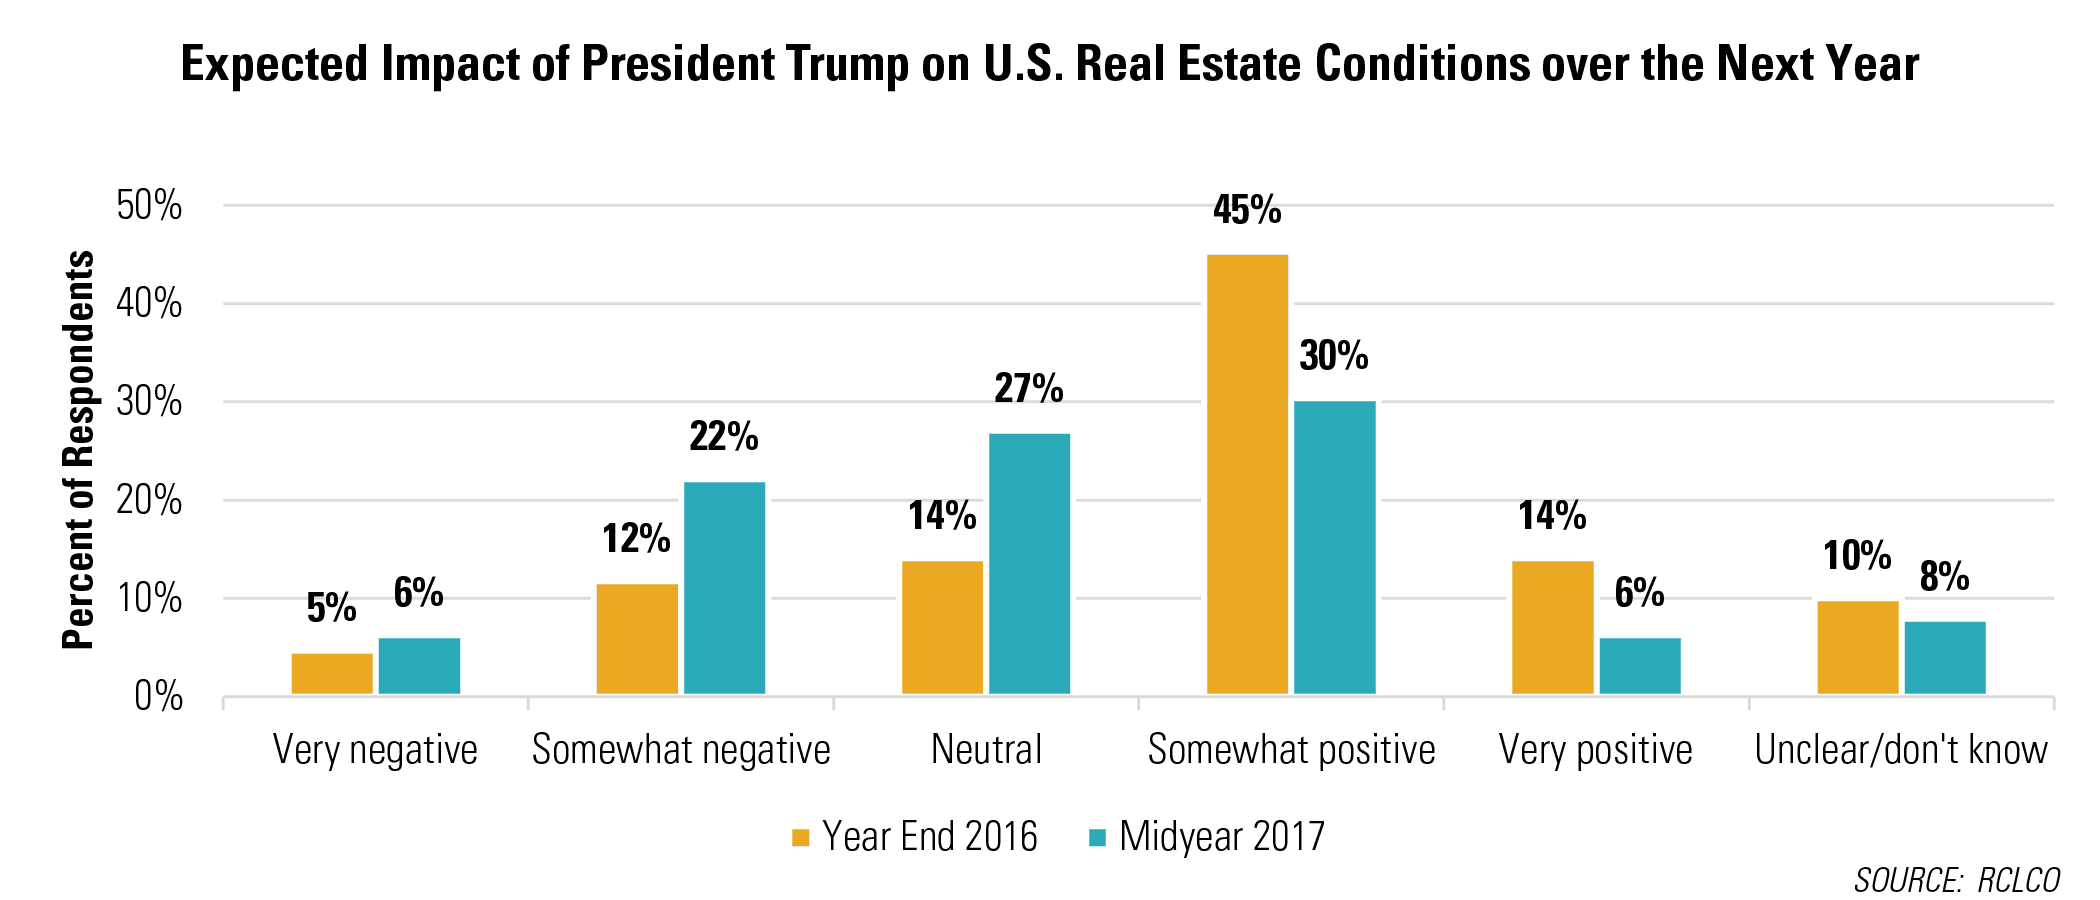 Expected Impact of President Trump on U.S. Real Estate Conditions over the Next Year